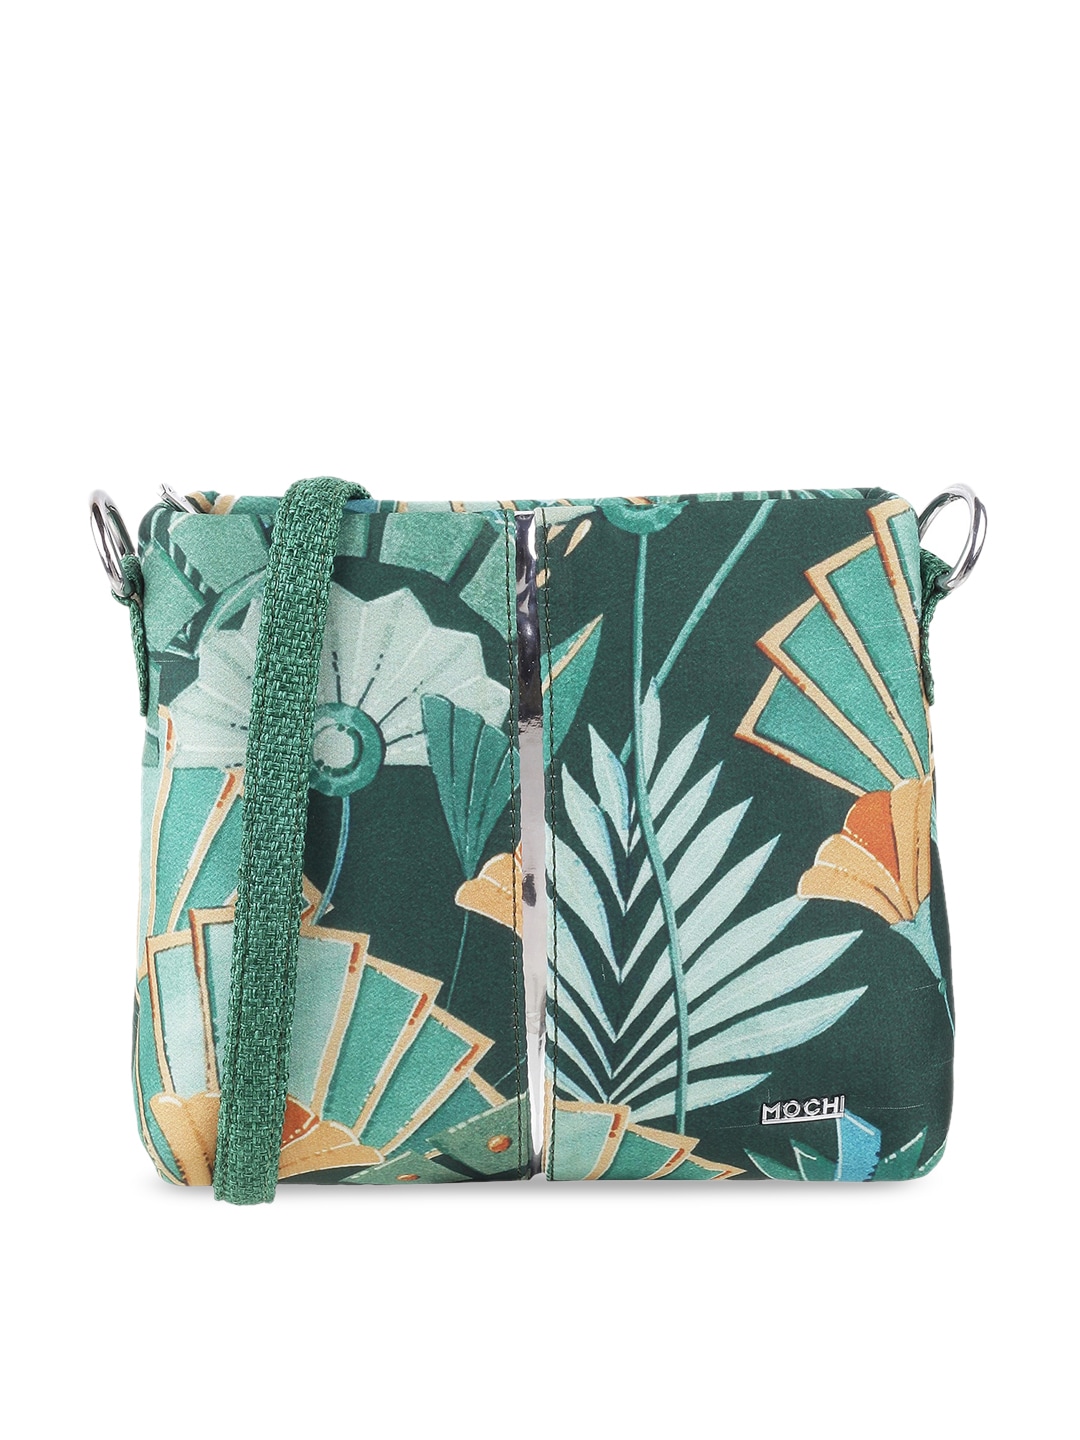 Mochi Green Floral Printed Structured Sling Bag Price in India